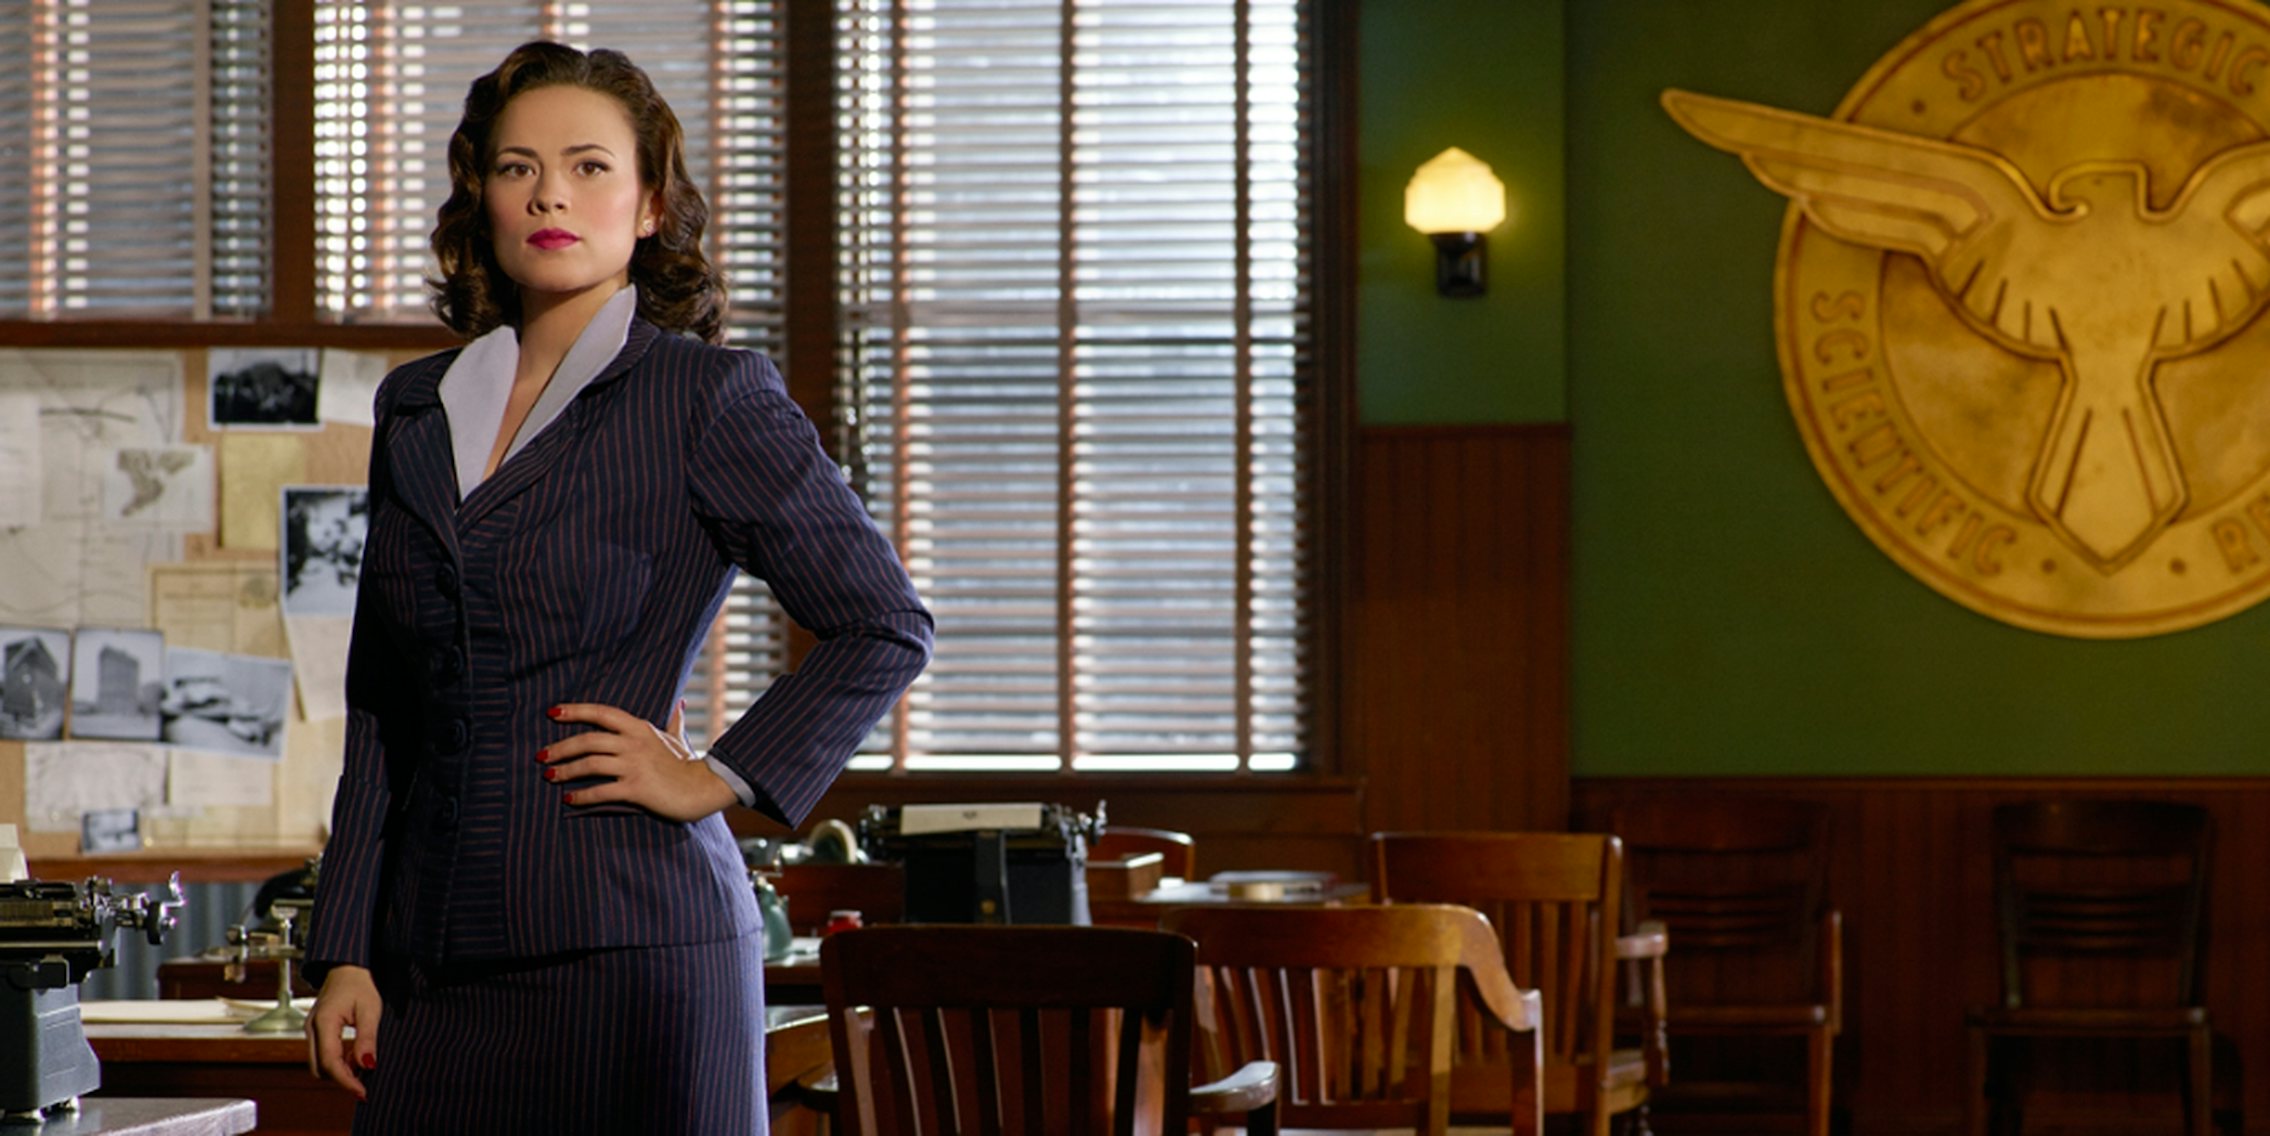 A guide to the amazing 1940s fashion in 'Agent Carter' - The Daily Dot